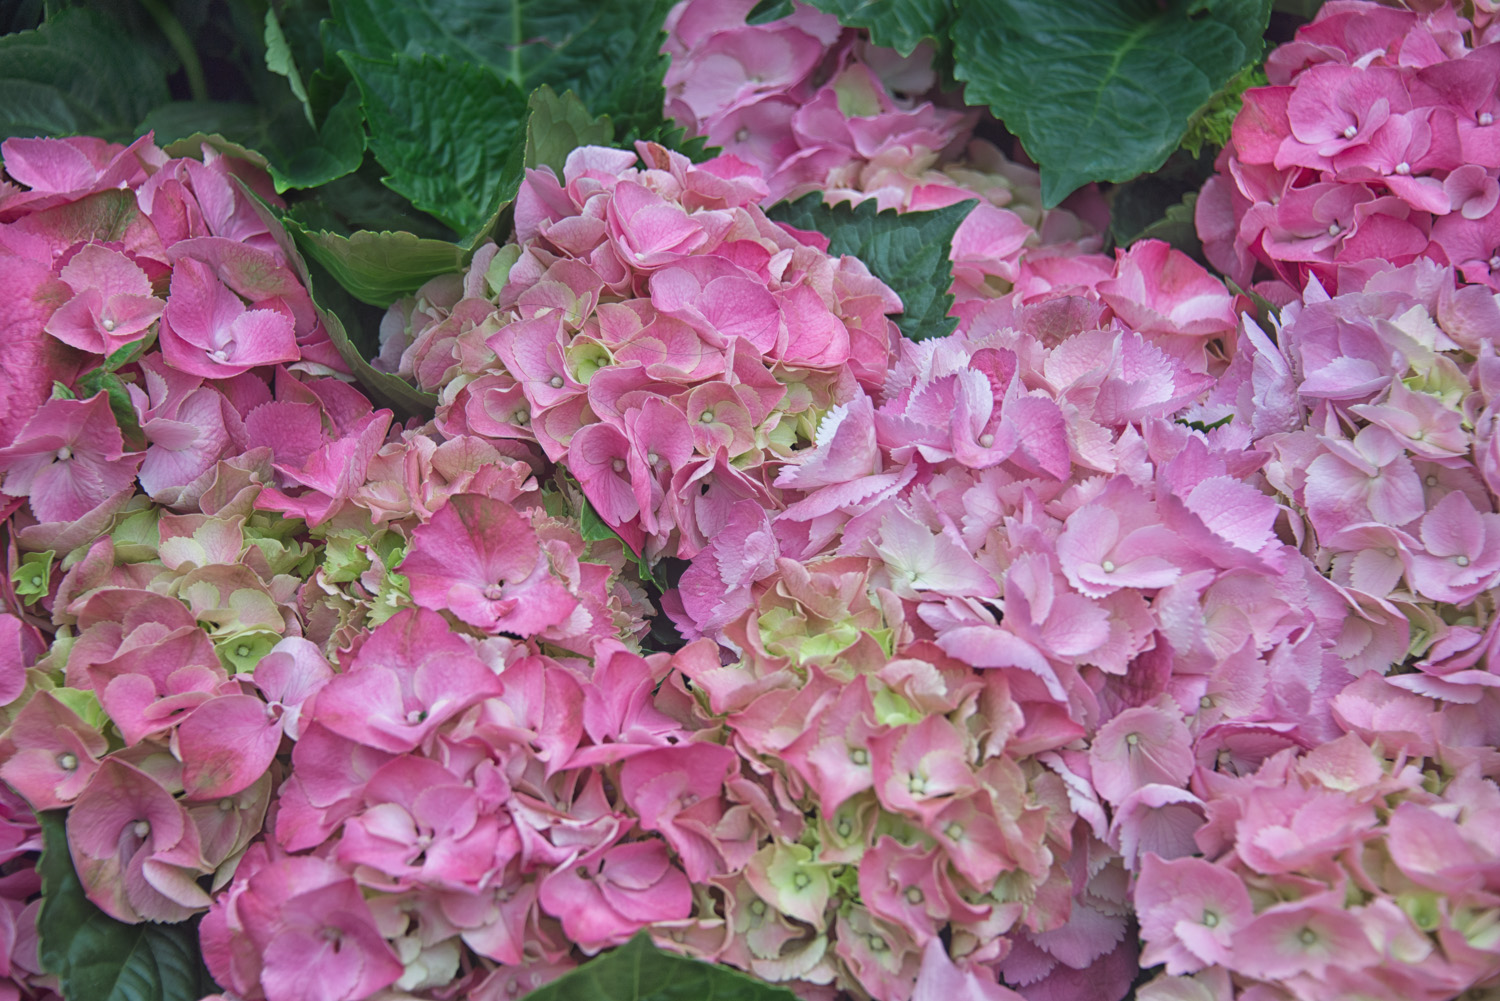 Bunches of Pink Hydrangea